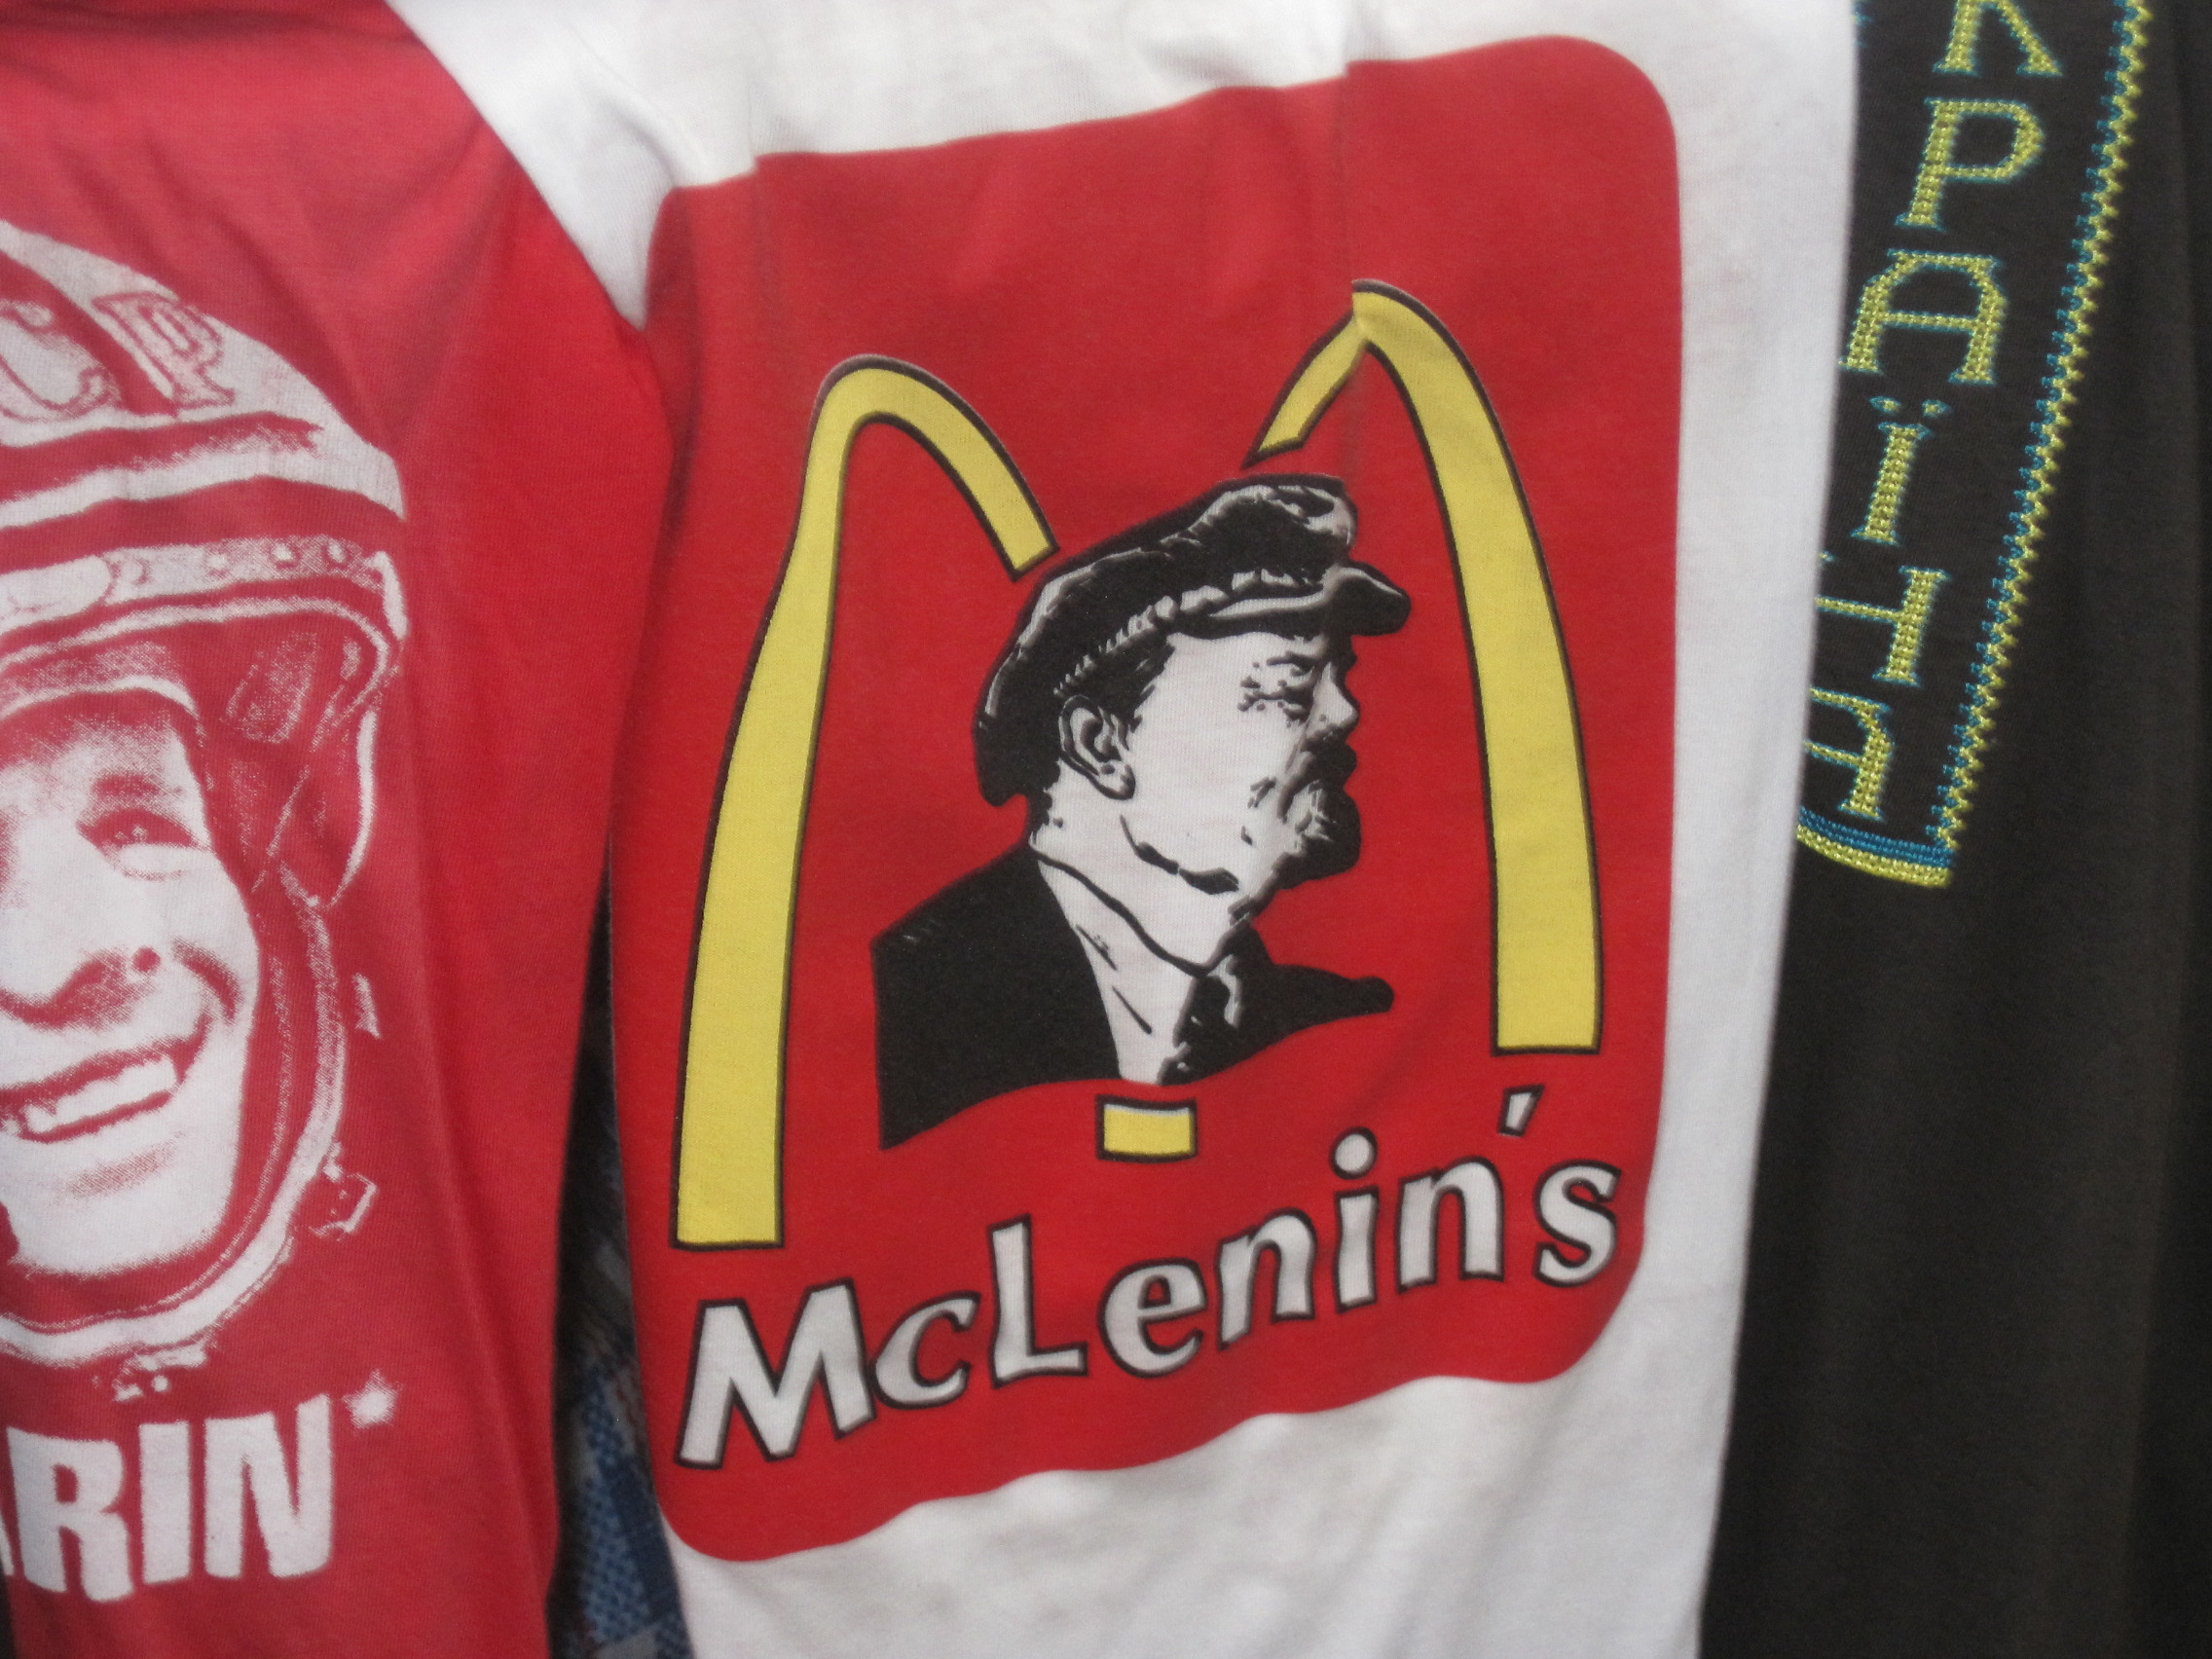 If McLenin's were, I'd eat there